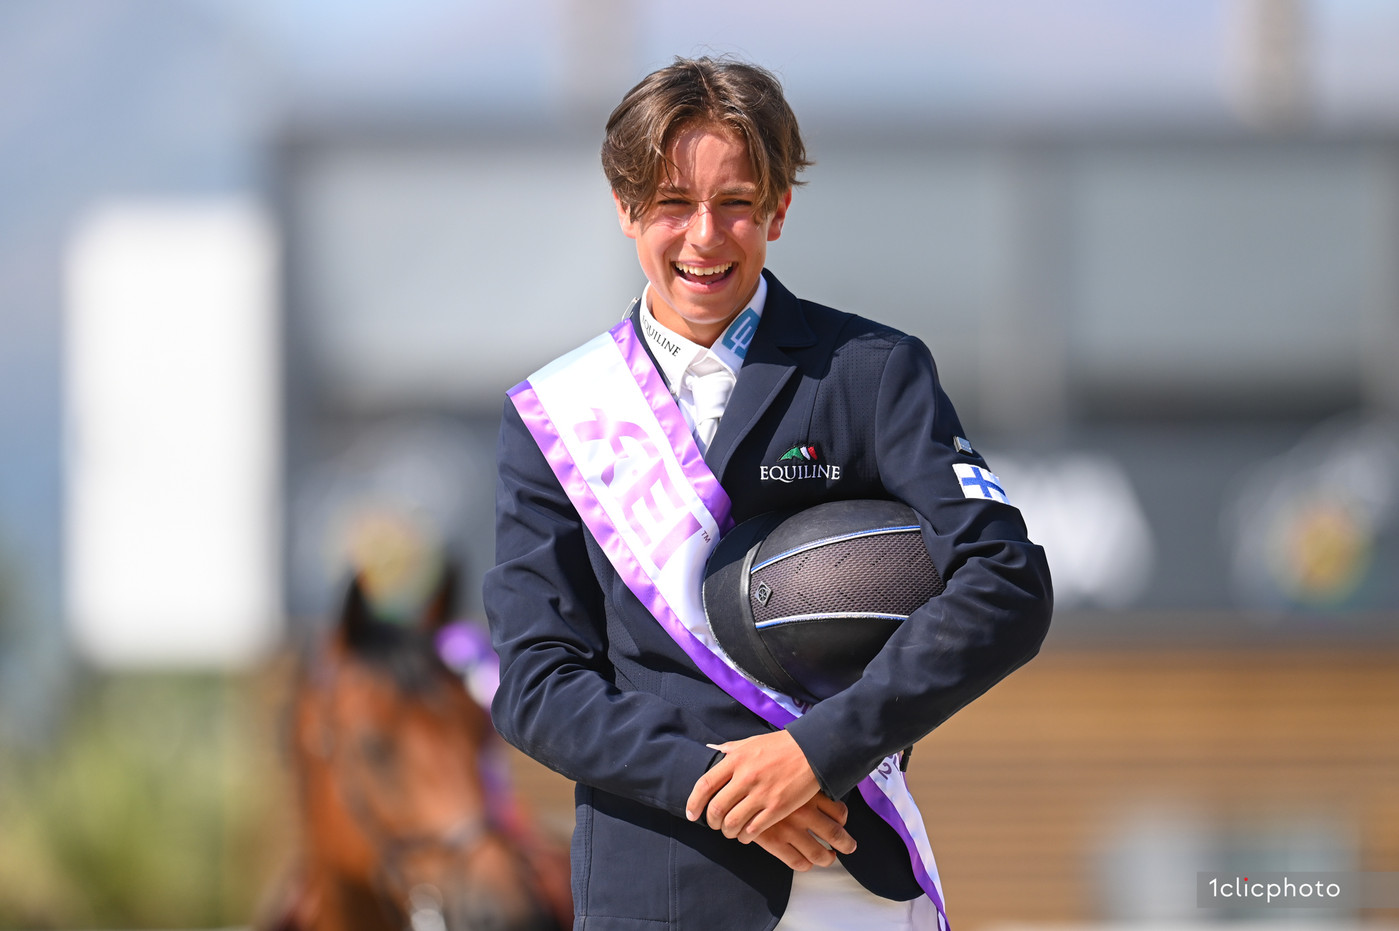 Finland’s Jone Illi crowned Junior Champion at the FEI Jumping European ...